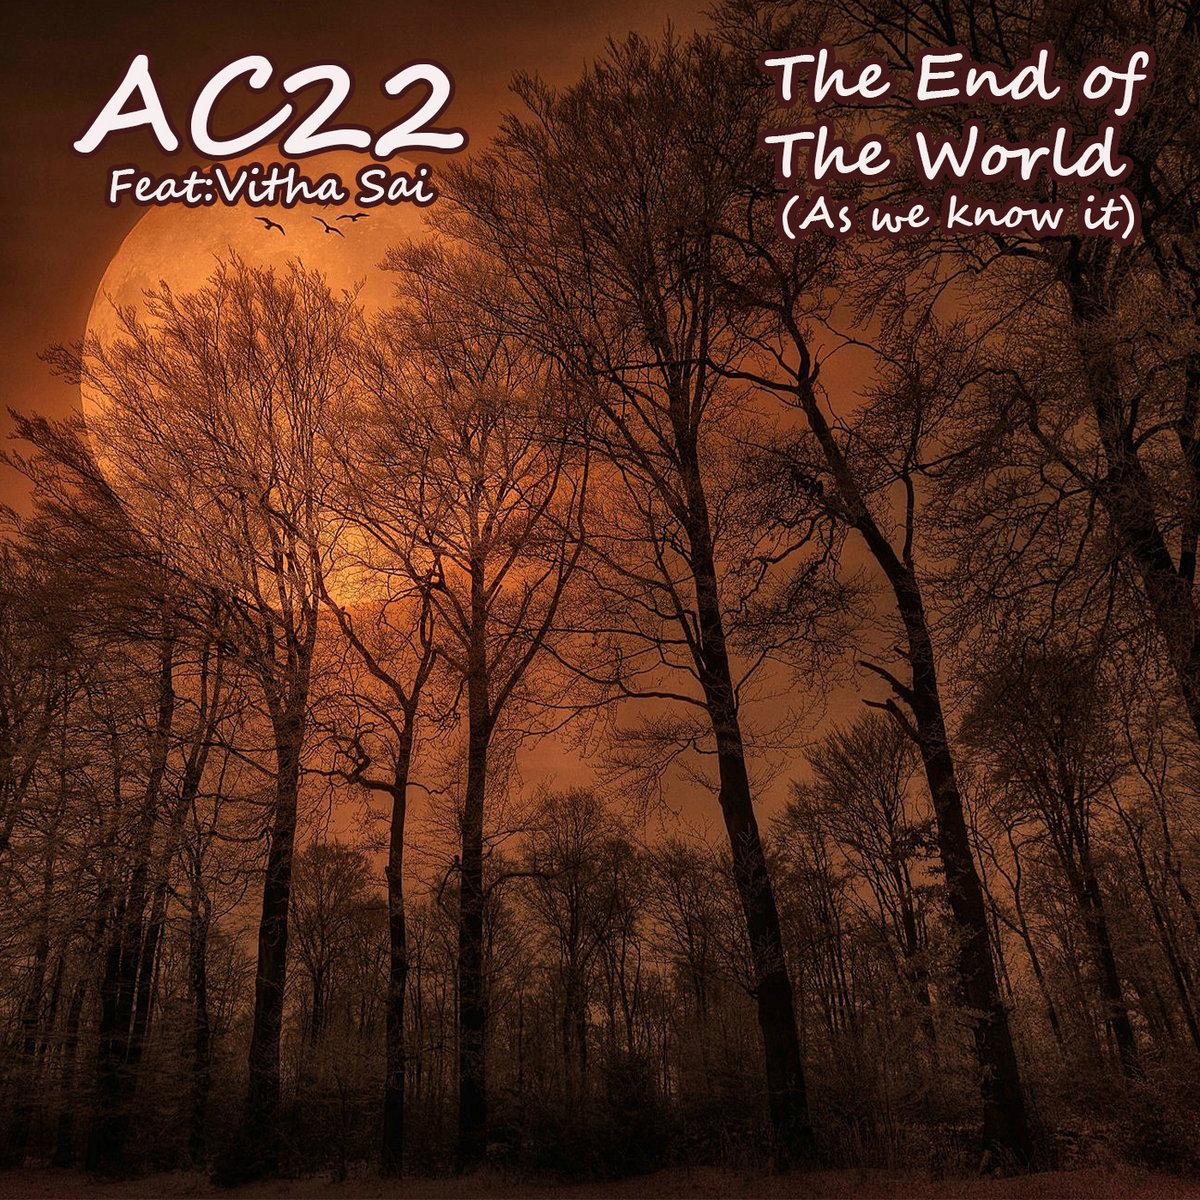 Ac22 end of the world